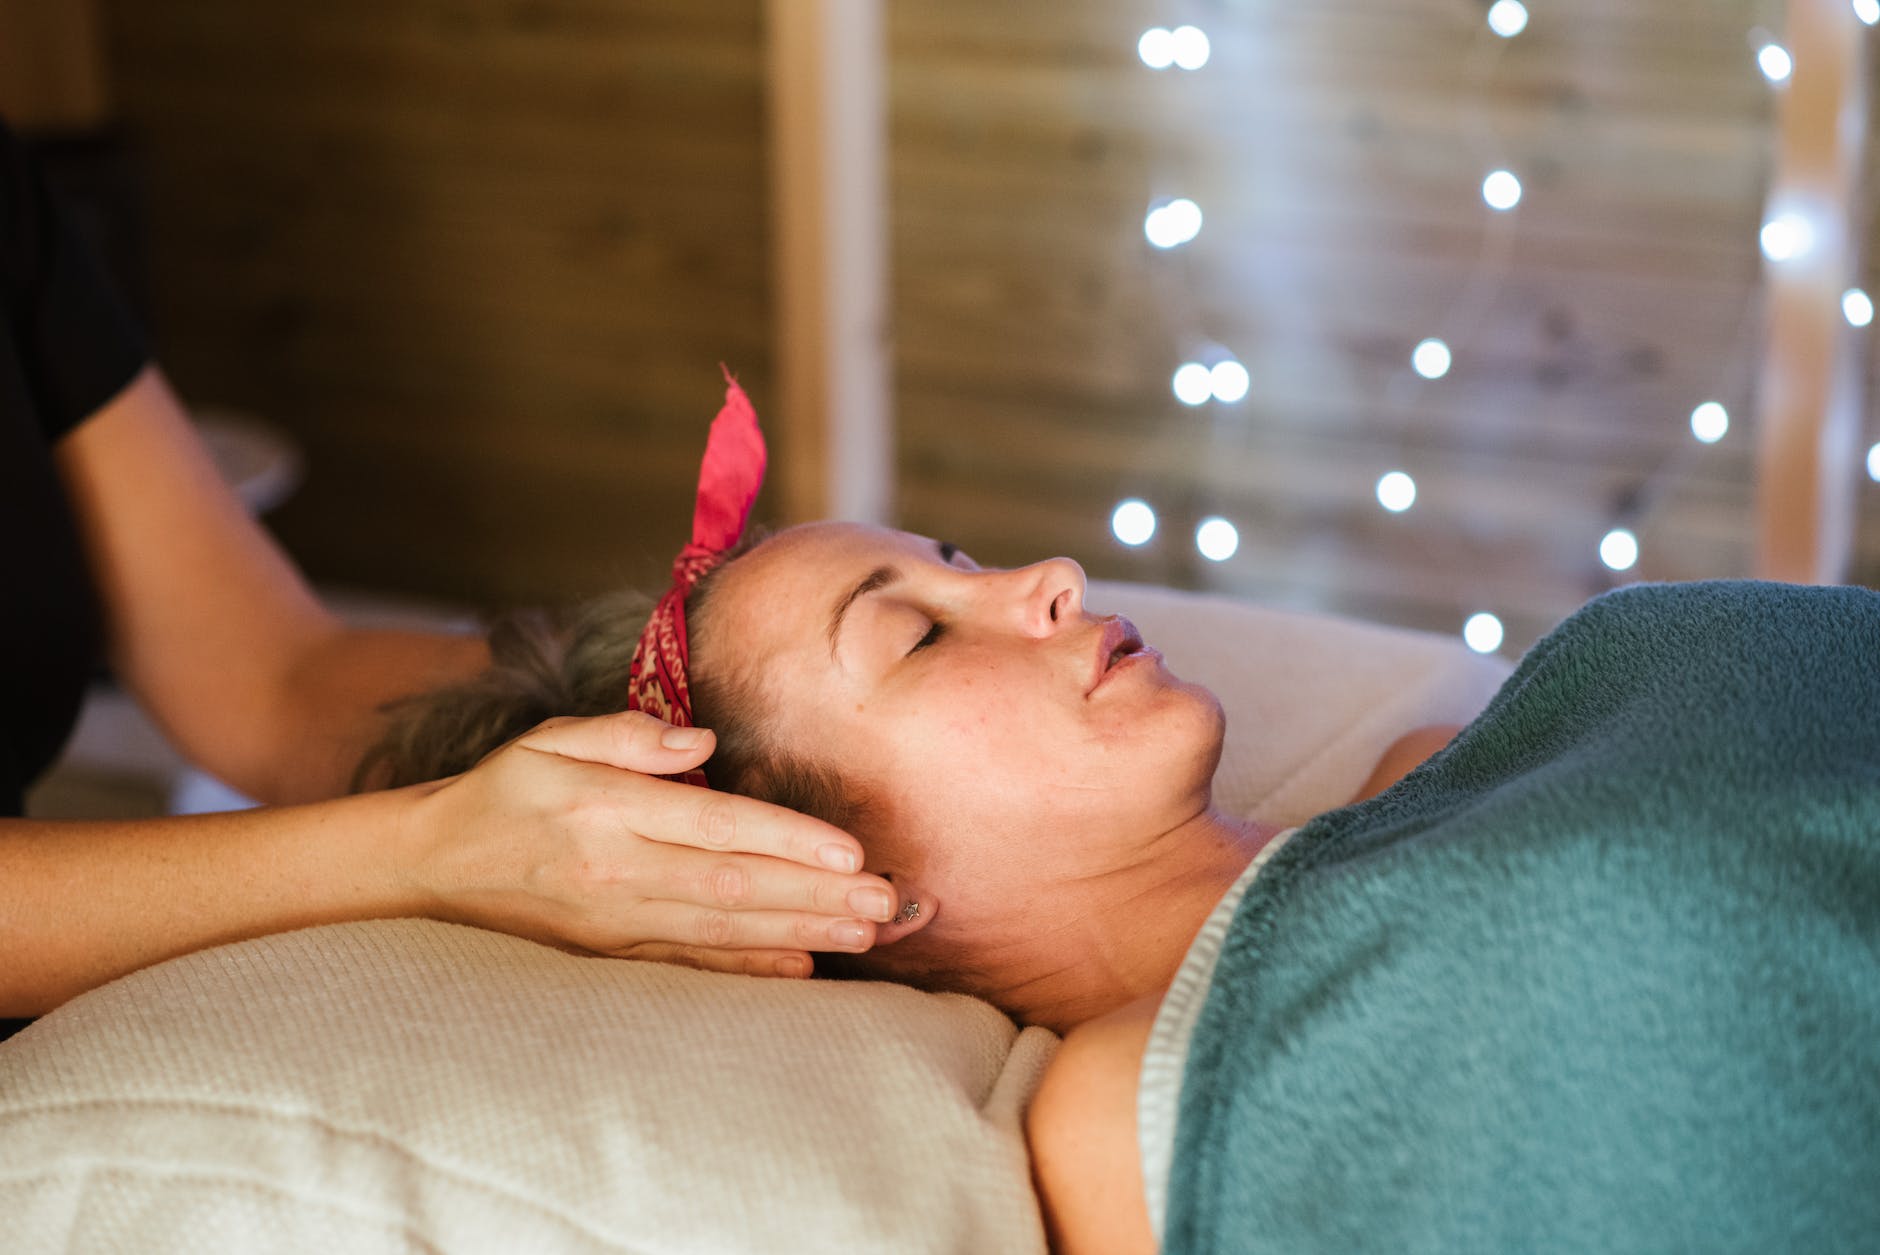 Reiki can bring balance, relaxation, and well-being to clients.